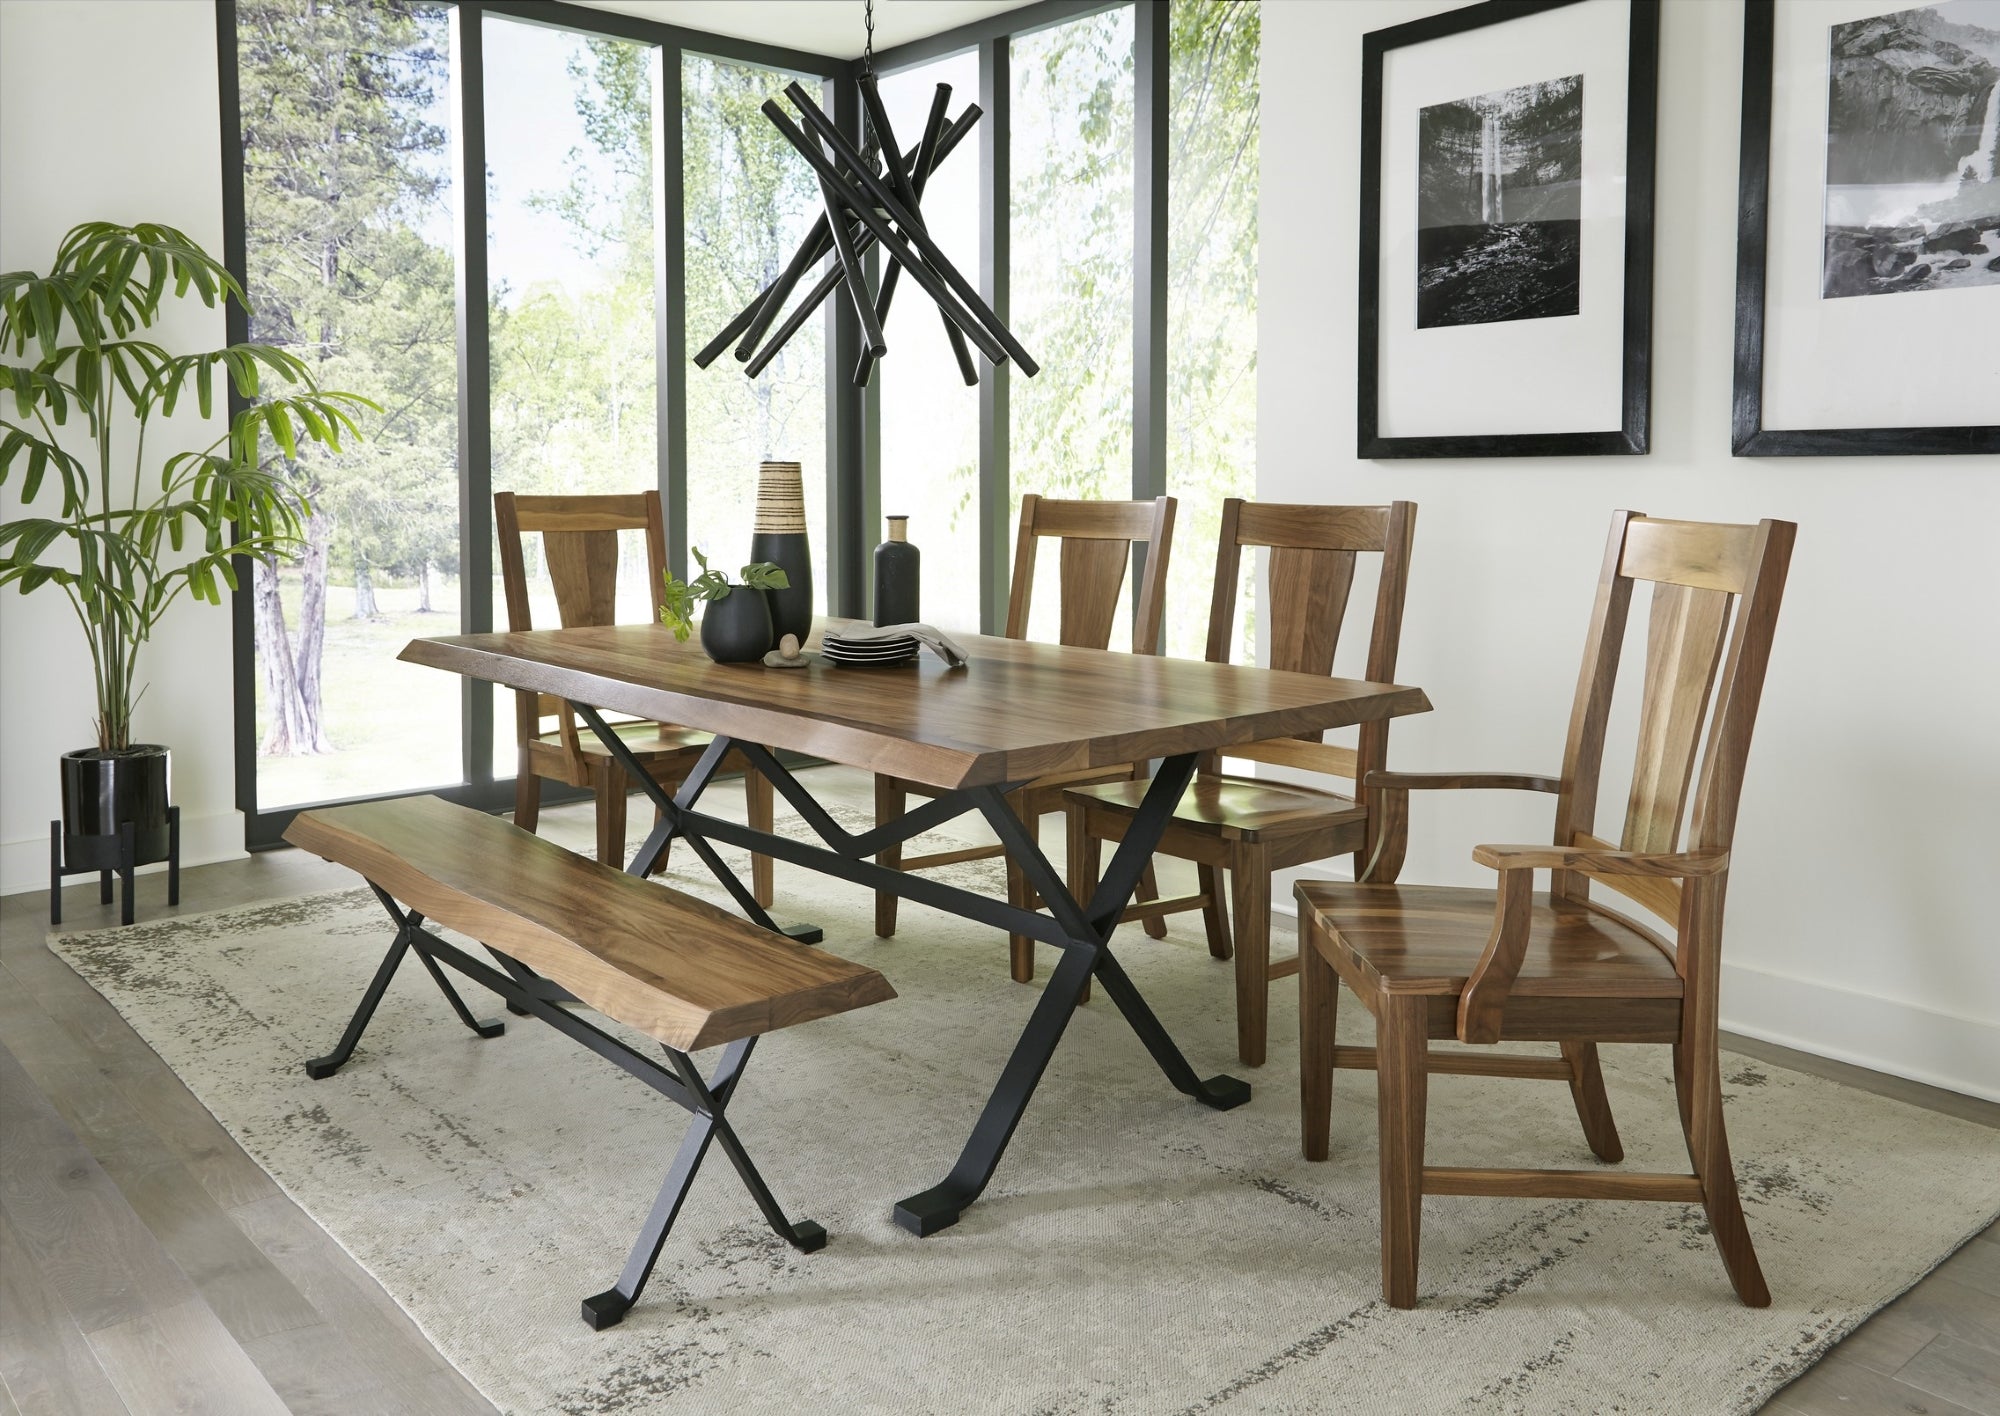 Live edge wood dining table with black metal base and matching bench with four wood dining chairs